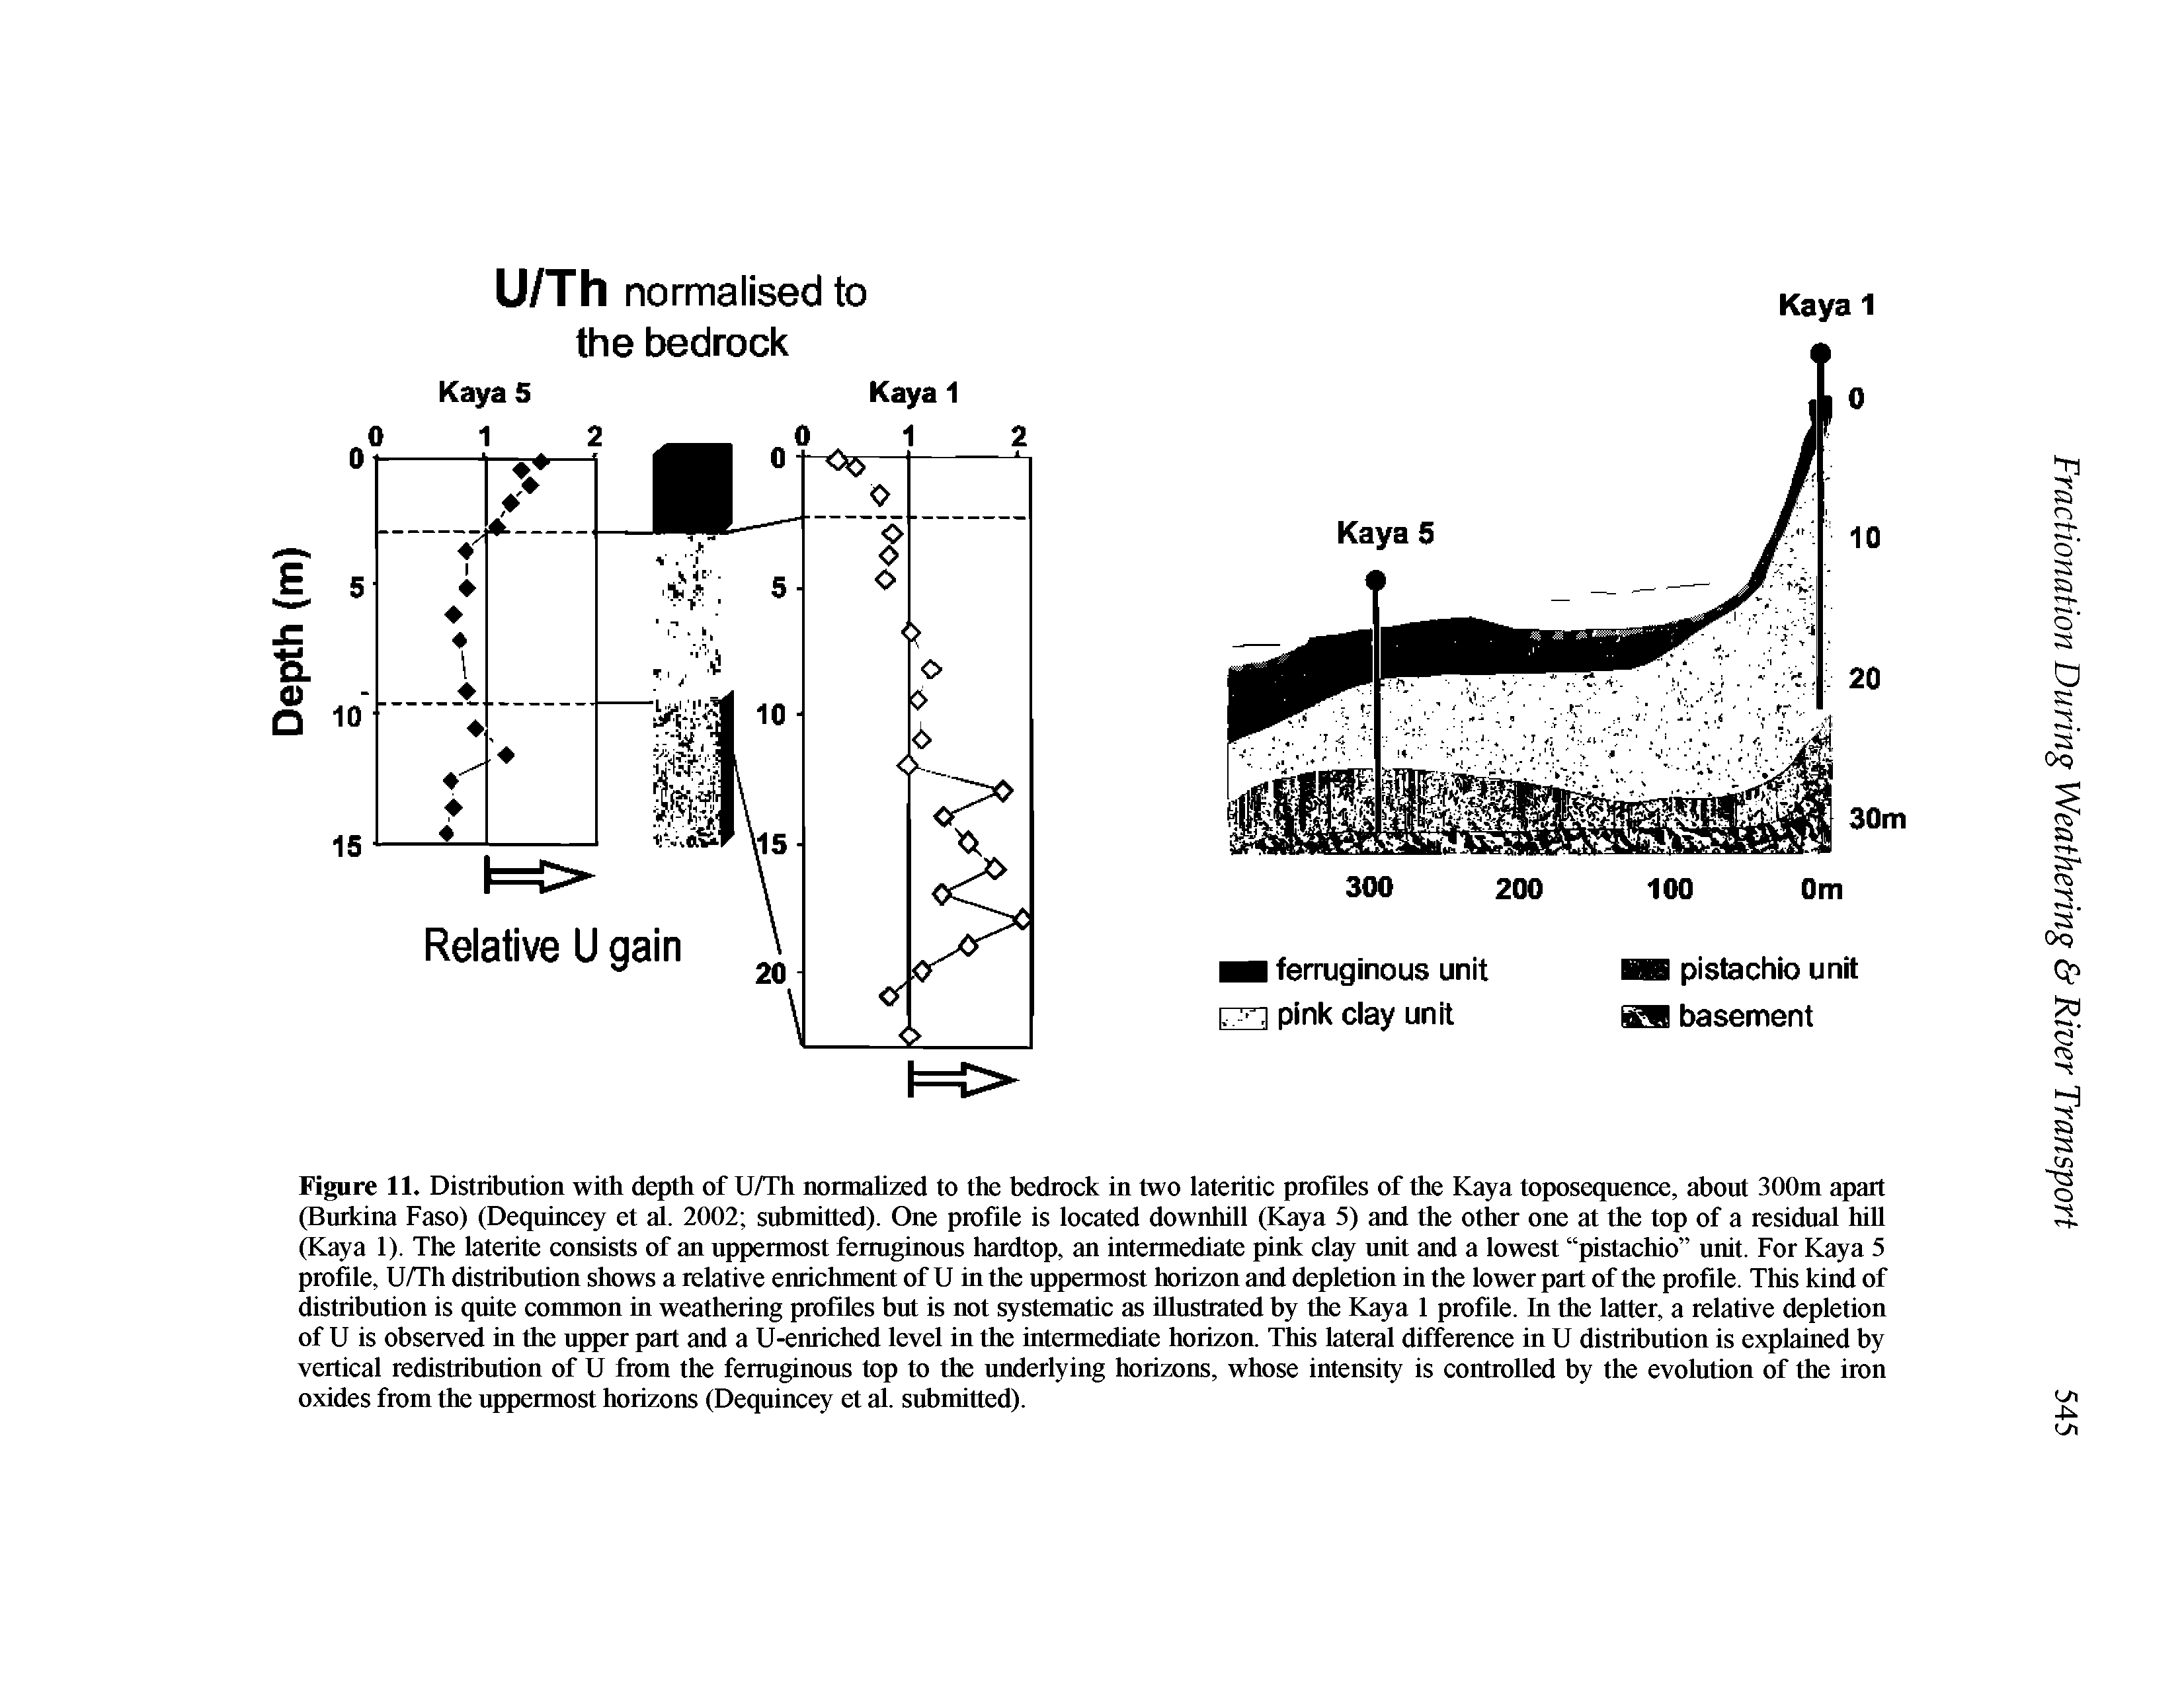 Figure 11. Distribution with depth of U/Th normahzed to the bedroek in two lateritic profiles of the Kaya toposeqnenee, about 300m apart (Burkina Faso) (Deqnineey et al. 2002 submitted). One profile is located downhill (Kaya 5) and the other one at the top of a residual hill (Kaya 1). The laterite consists of an uppermost fermginous hardtop, an intermediate pink clay nnit and a lowest pistachio unit. For Kaya 5 profile, U/Th distribntion shows a relative enrichment of U in the nppermost horizon and depletion in the lower part of the profile. This kind of distribution is quite conunon in weathering profiles bnt is not systematic as illnstrated by the Kaya 1 profile. In the latter, a relative depletion of U is observed in the npper part and a U-enriched level in the intermediate horizon. This lateral difference in U distribution is explained by vertical redistribntion of U from the ferruginons top to the nnderlying horizons, whose intensity is controlled by the evolntion of the iron oxides from the nppermost horizons (Dequincey et al. snbmitted).